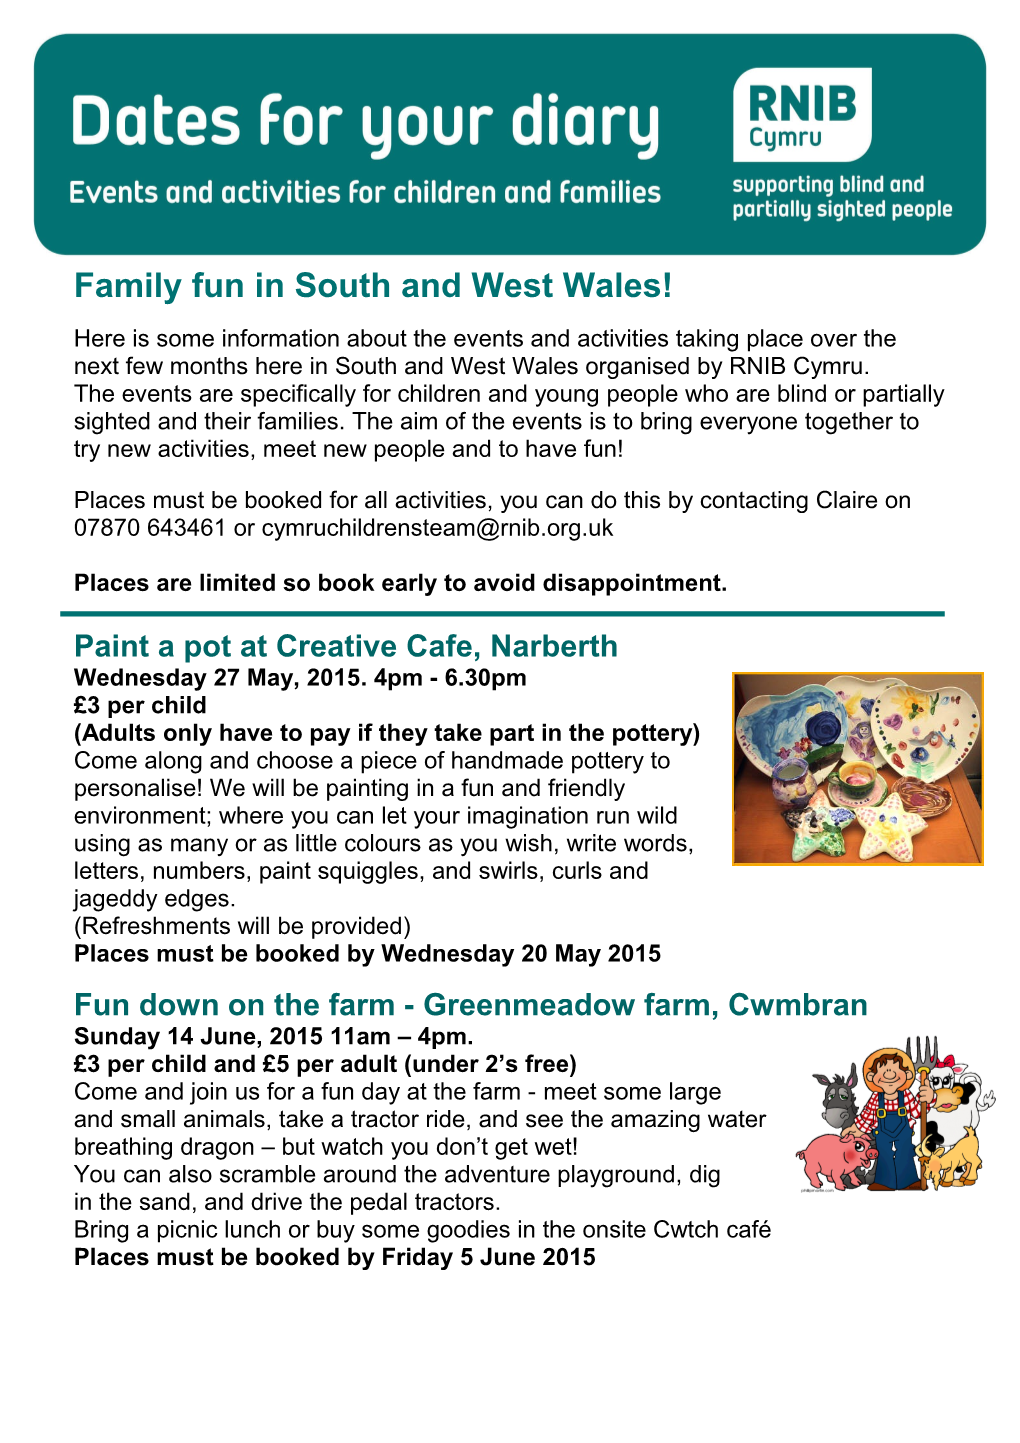 Family Fun in South and West Wales!